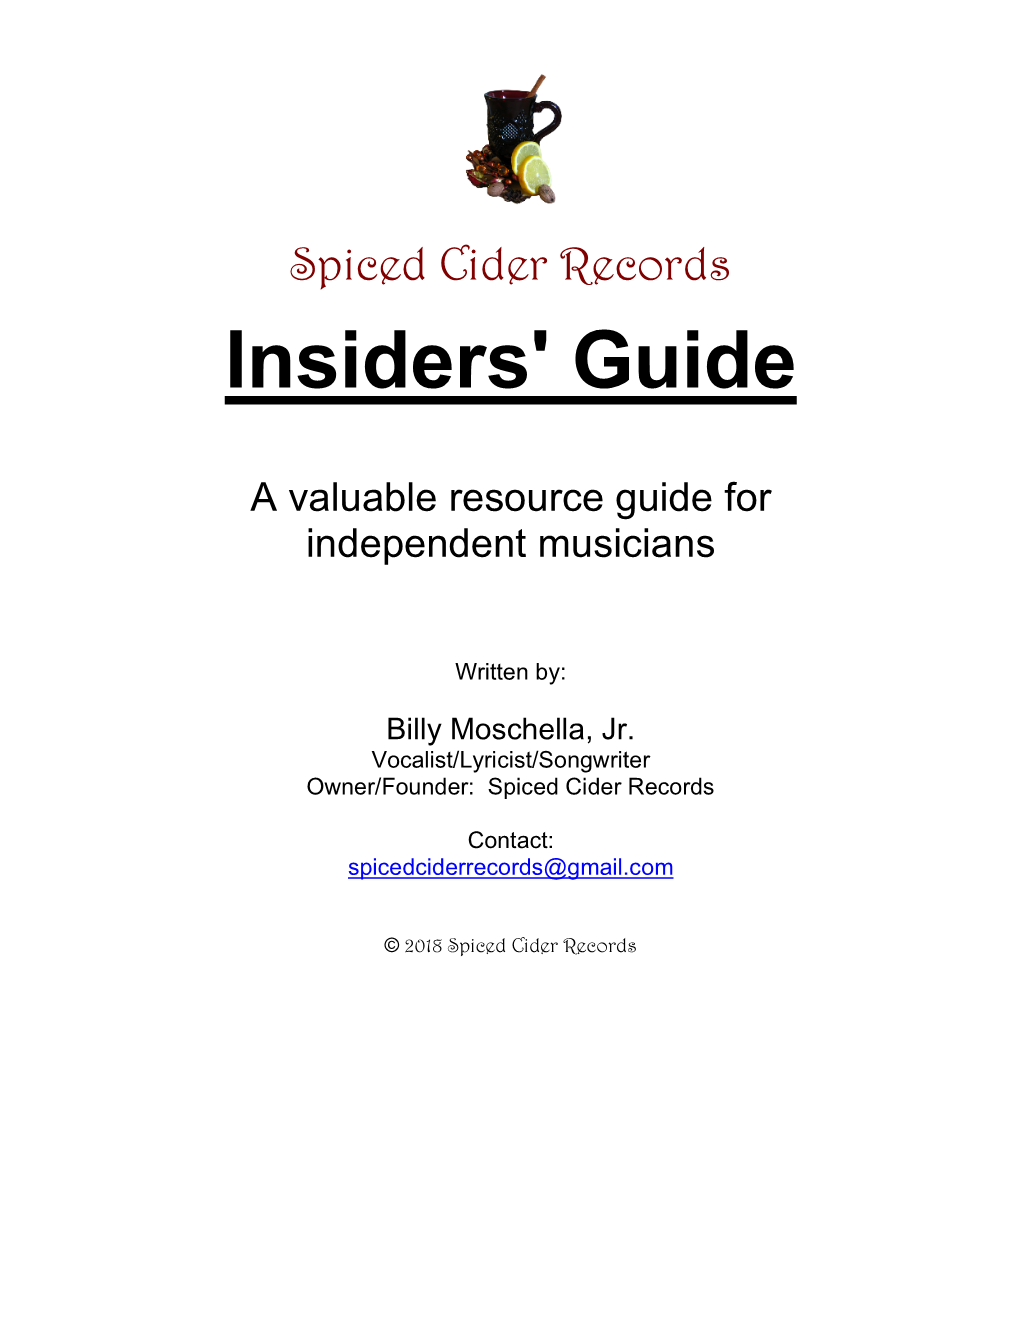 Spiced Cider Records Insiders' Guide